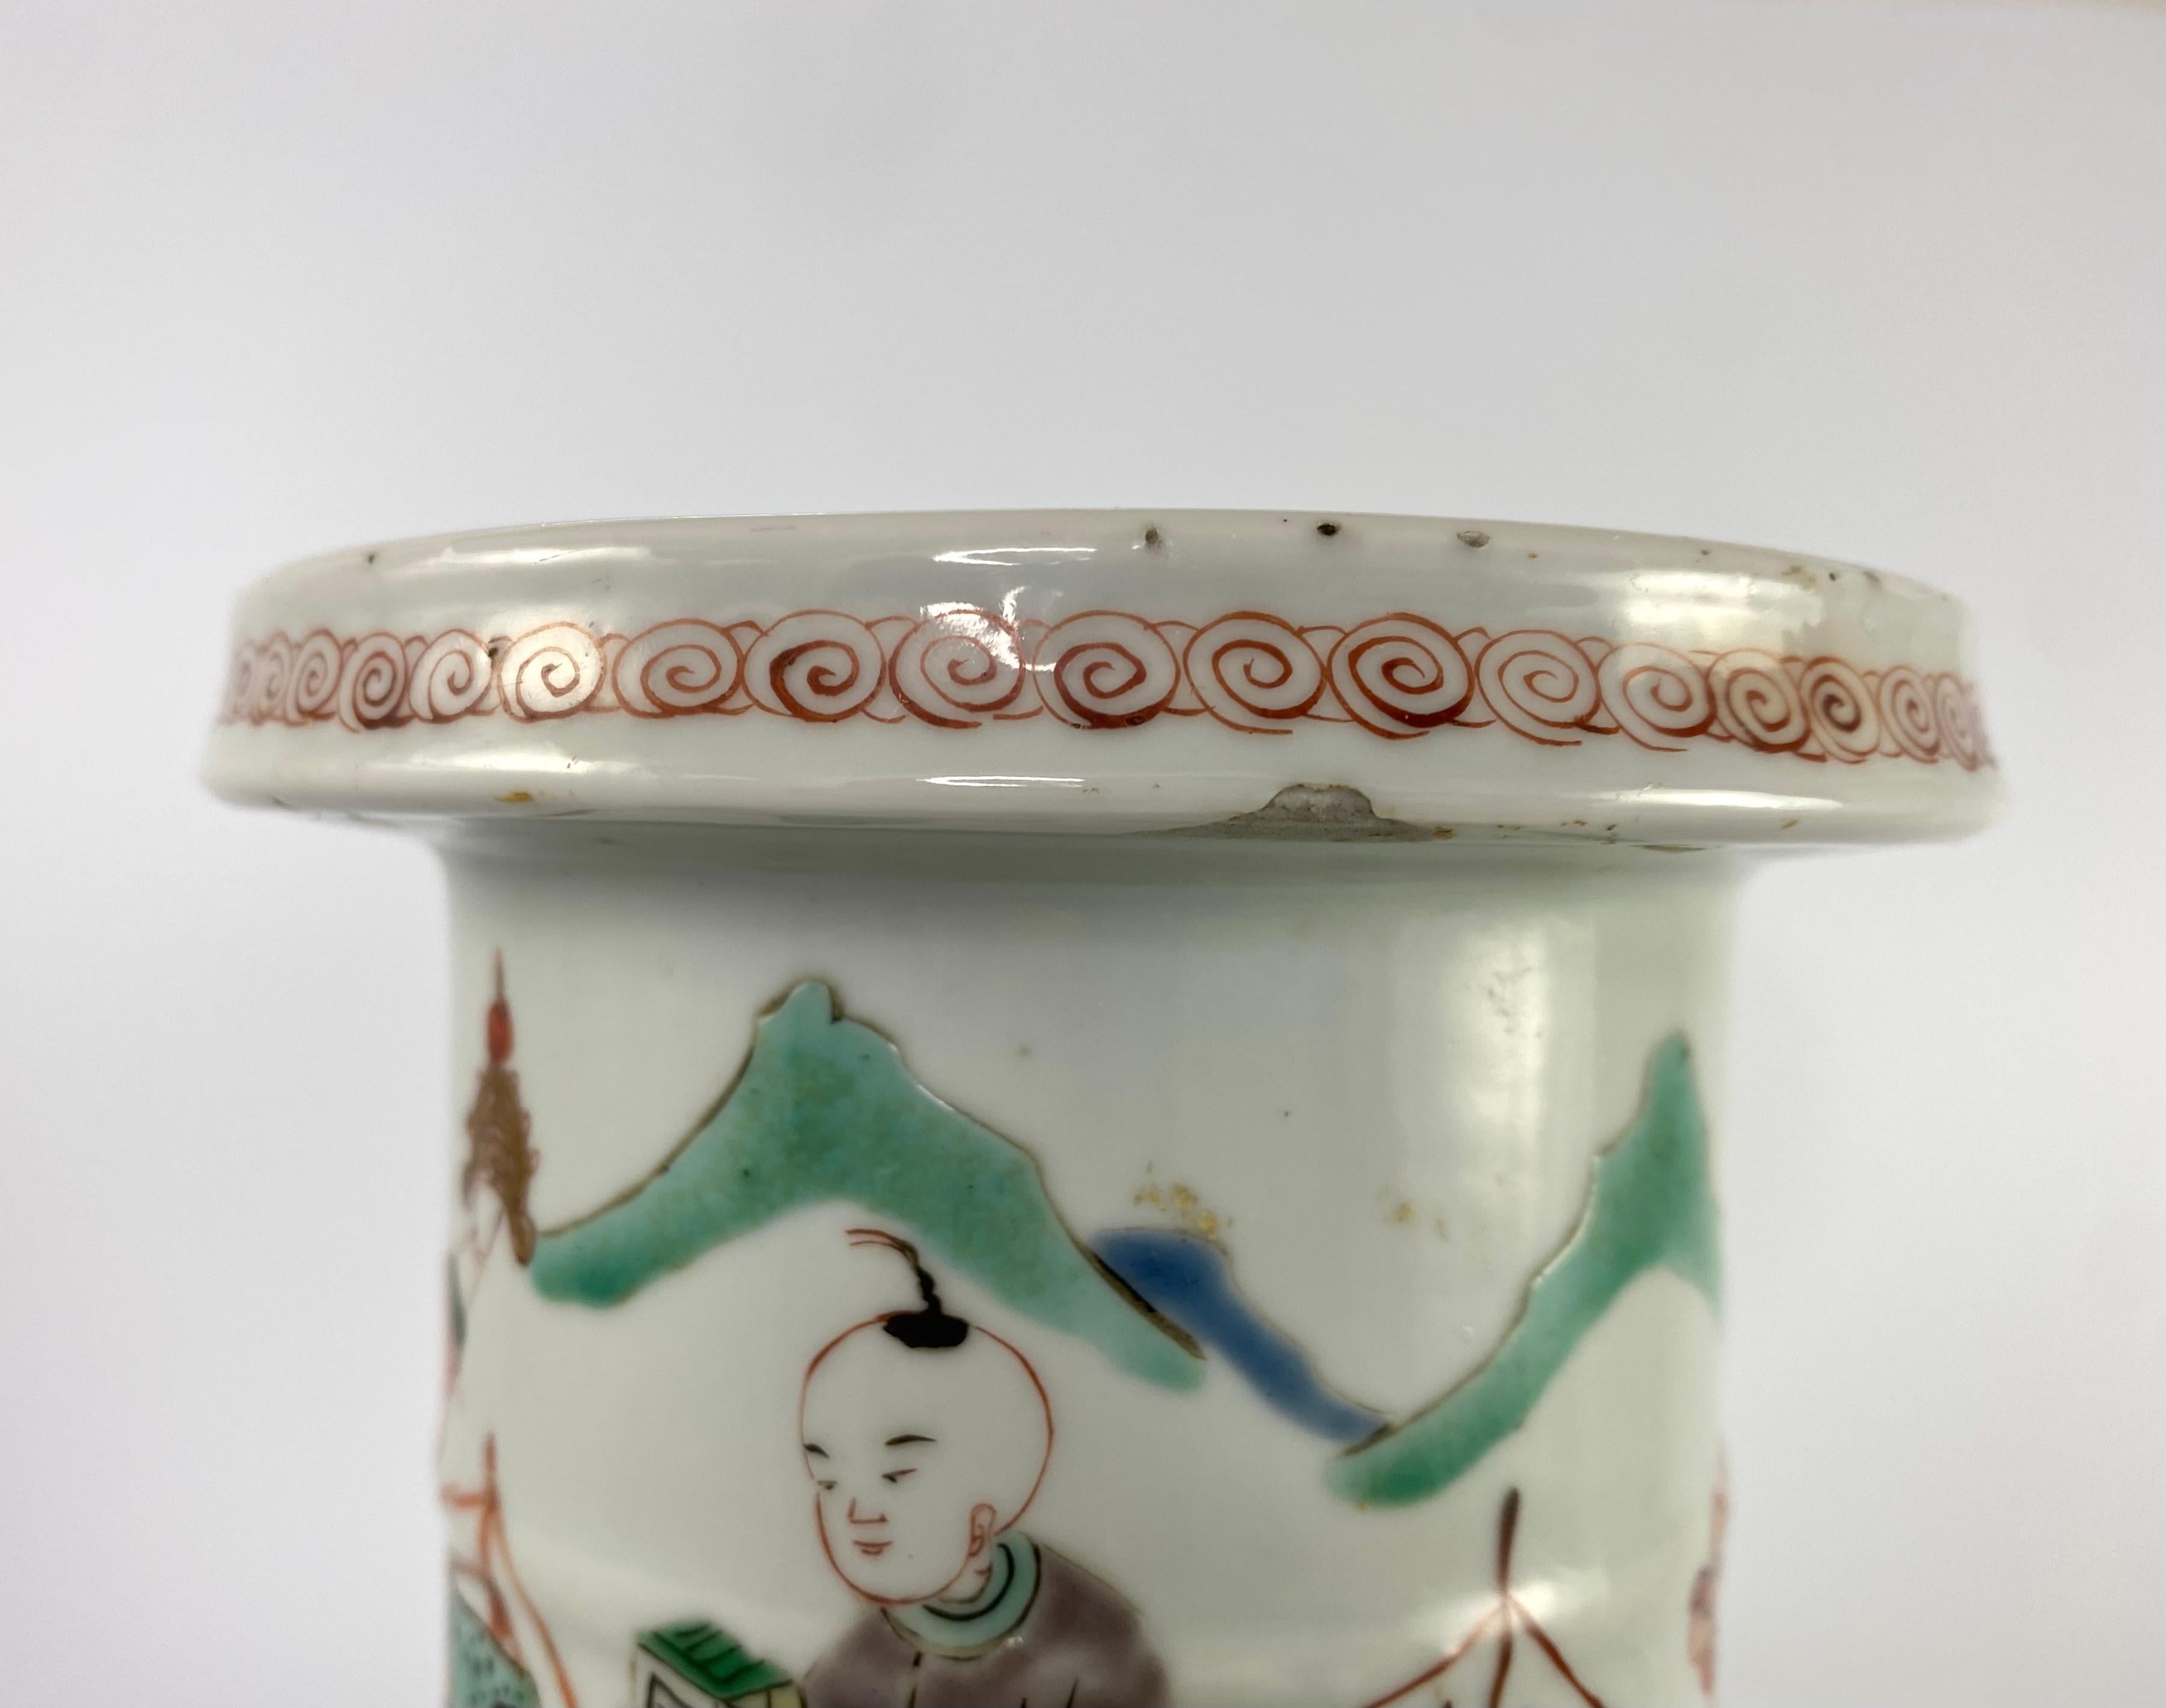 Chinese Porcelain Rolleau Vase, 19th C. Qing Dynasty 12